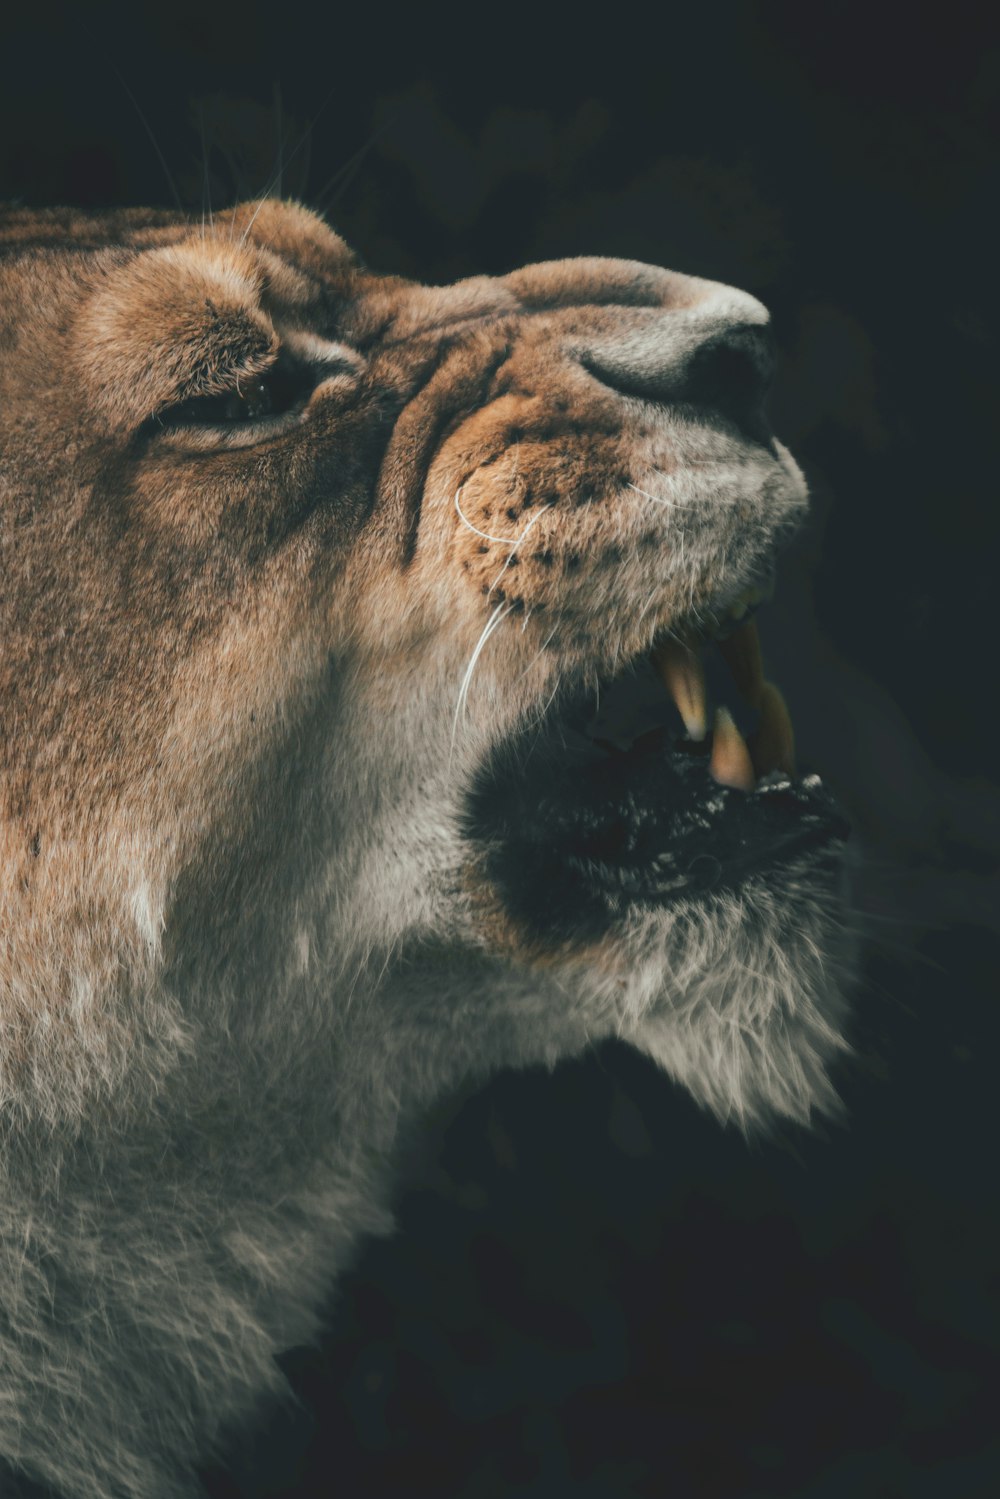 a close up of a lion's face with its mouth open